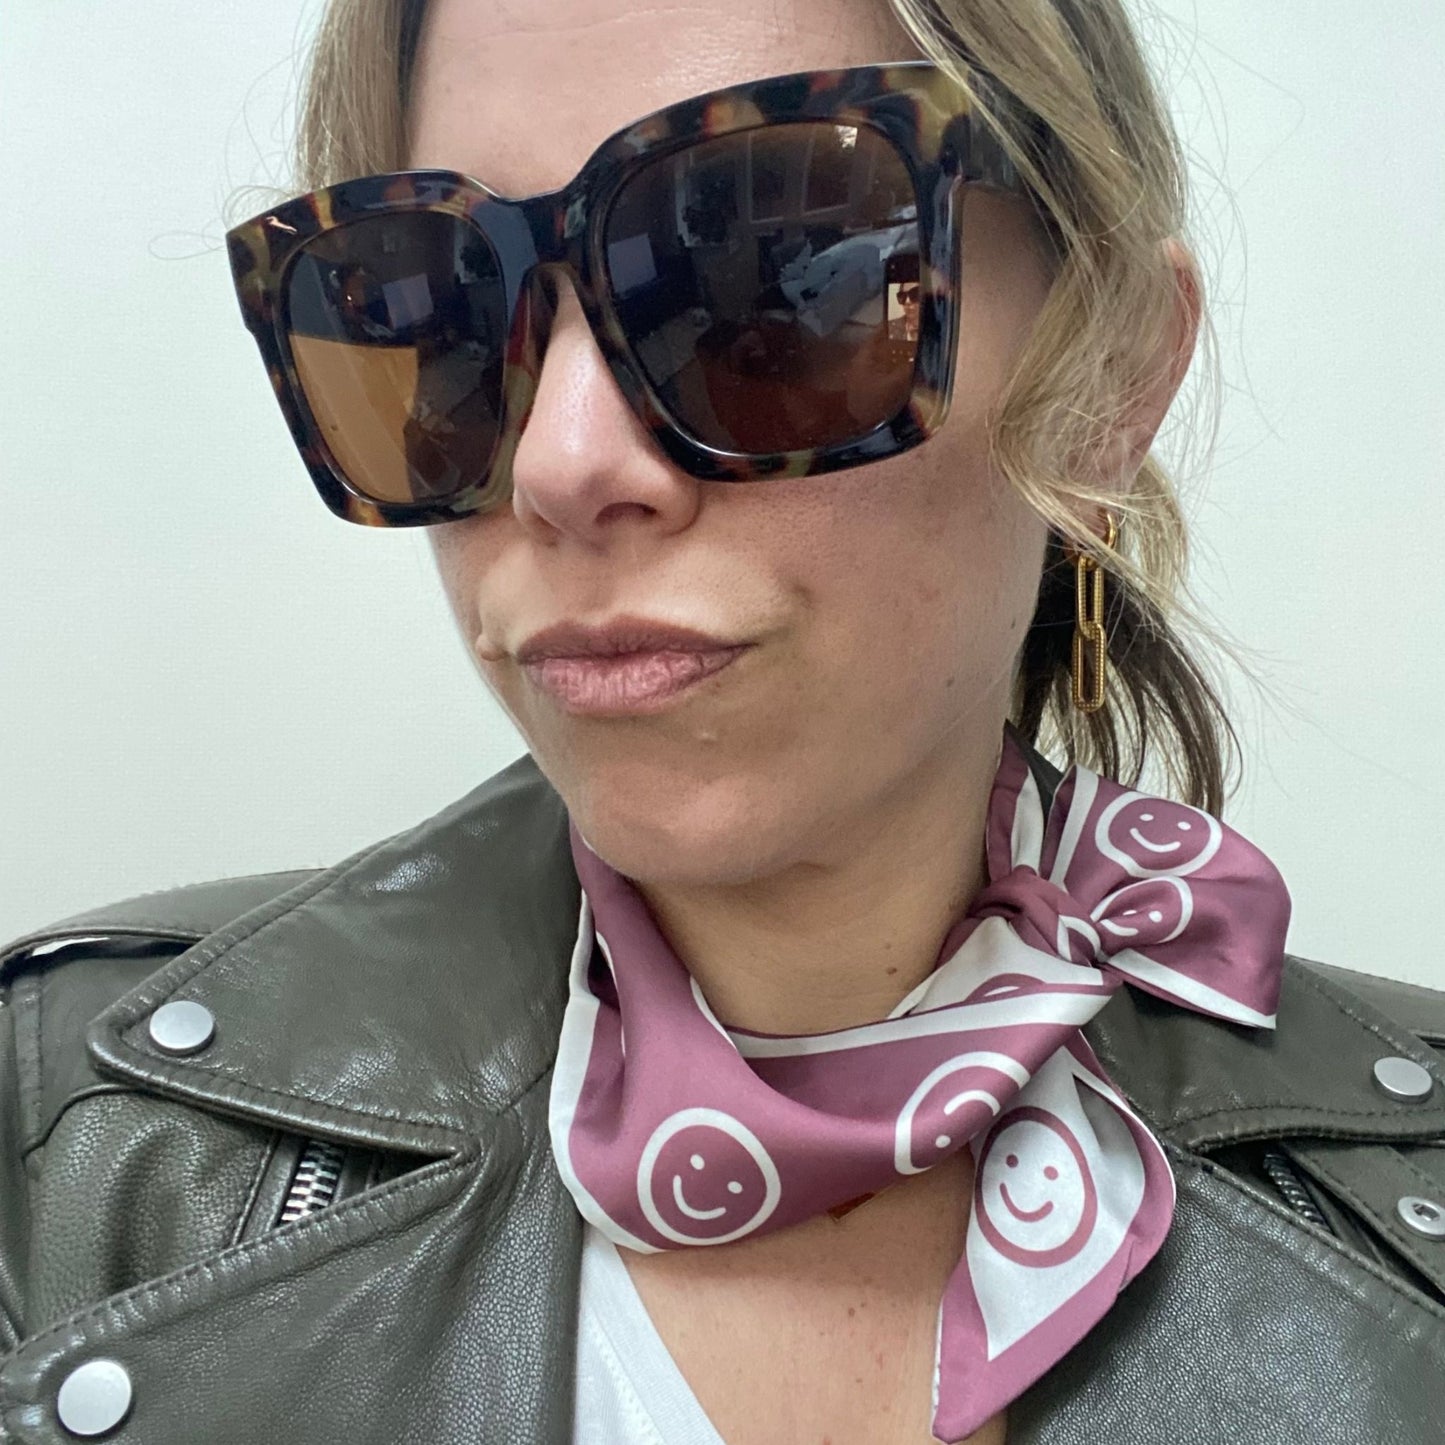 pink smiley face scarf with leather jacket